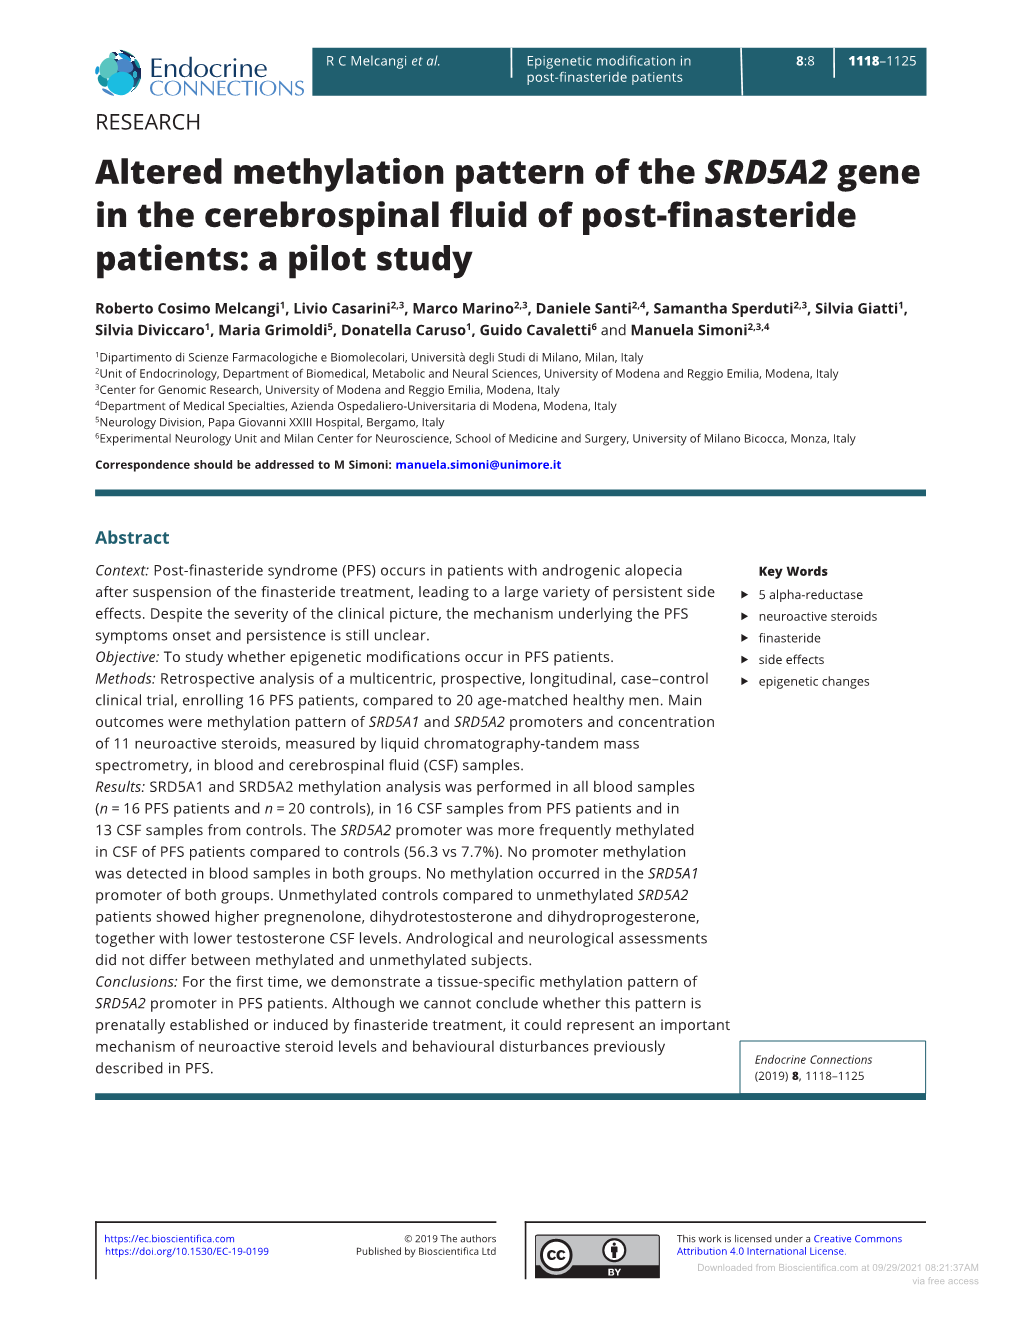 Altered Methylation Pattern of the SRD5A2 Gene in the Cerebrospinal Fluid of Post-Finasteride Patients: a Pilot Study